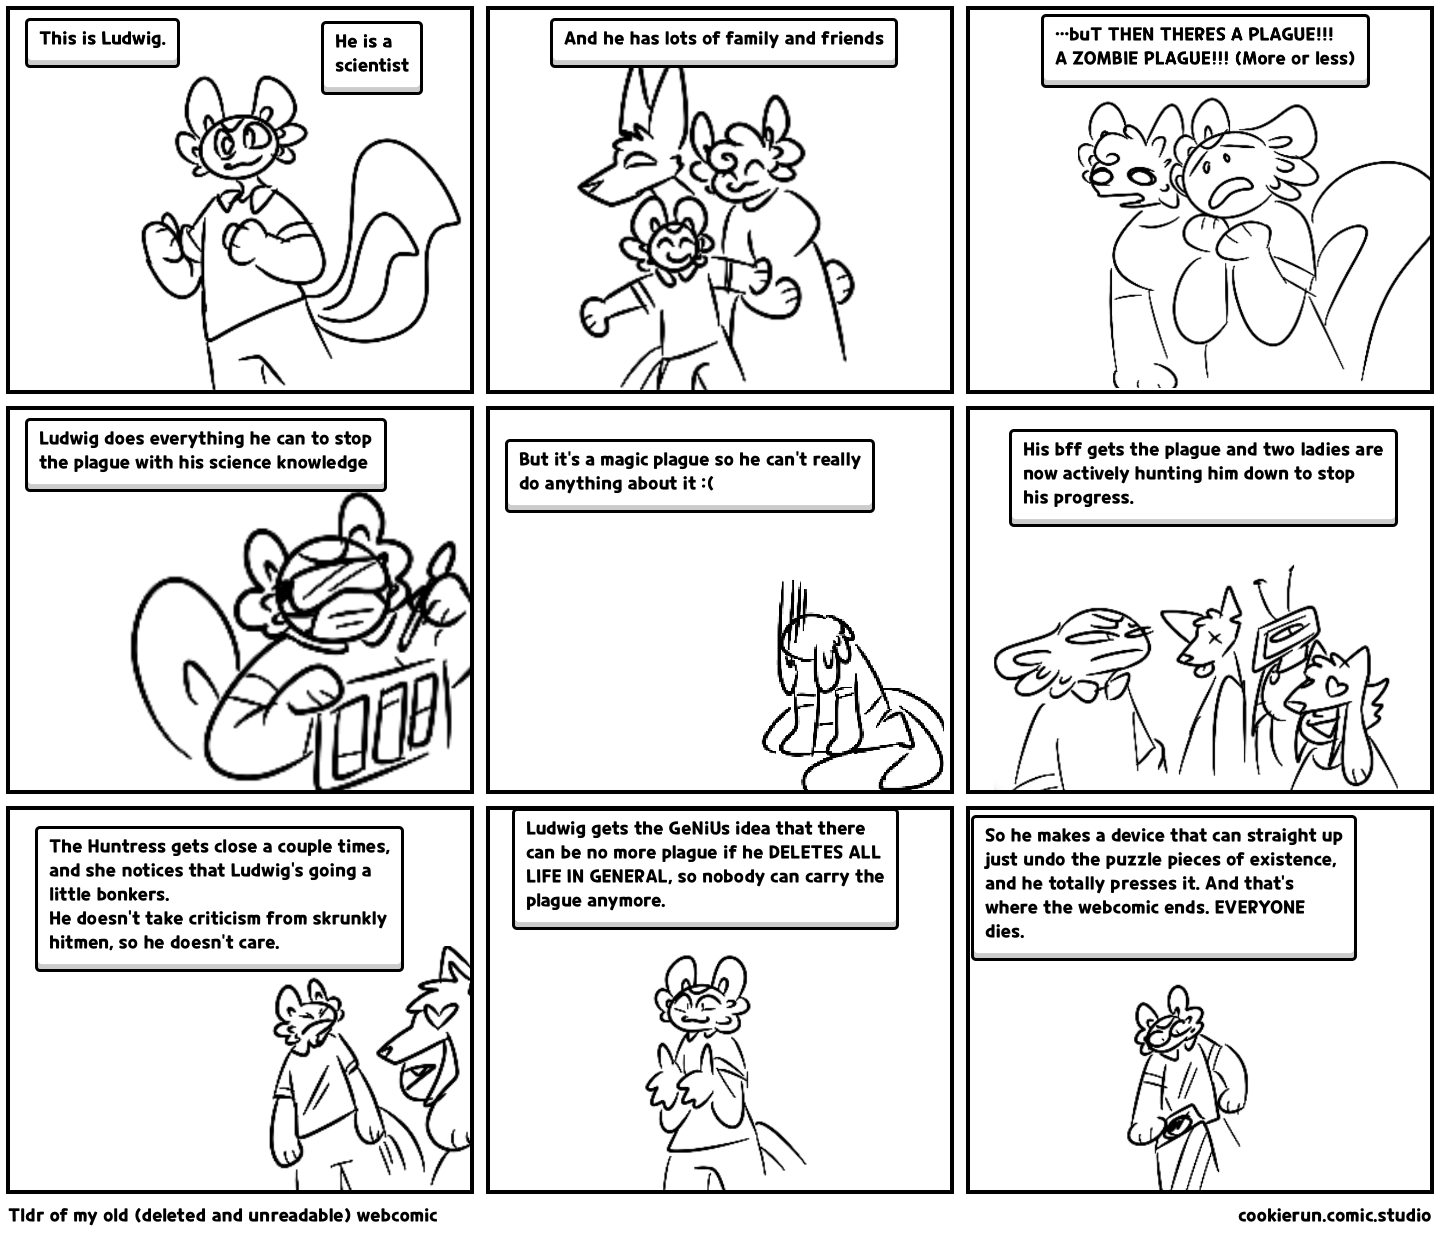 Tldr of my old (deleted and unreadable) webcomic